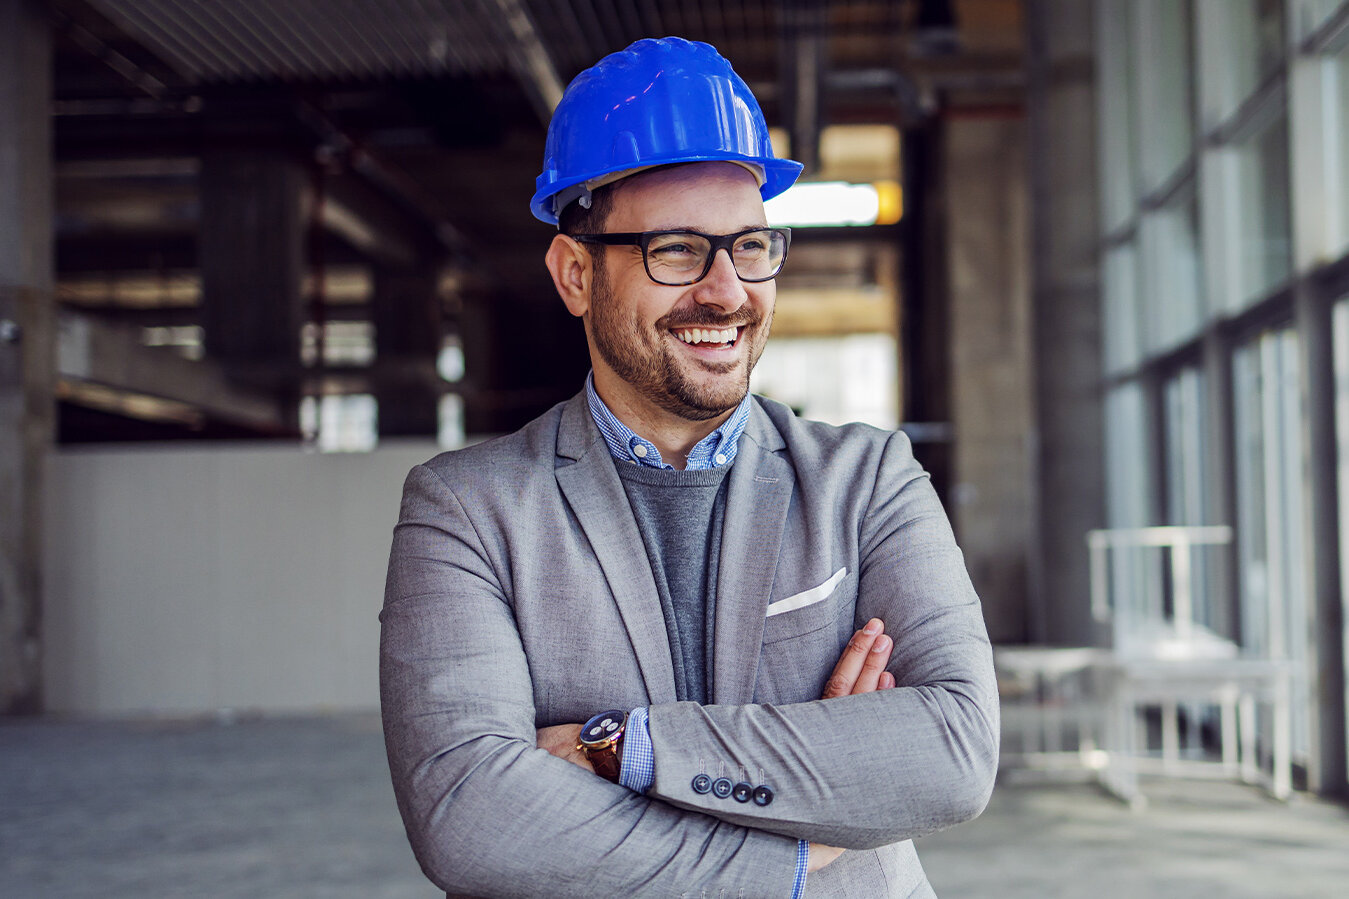 Smiling man with construction site helmet stands in almost empty room